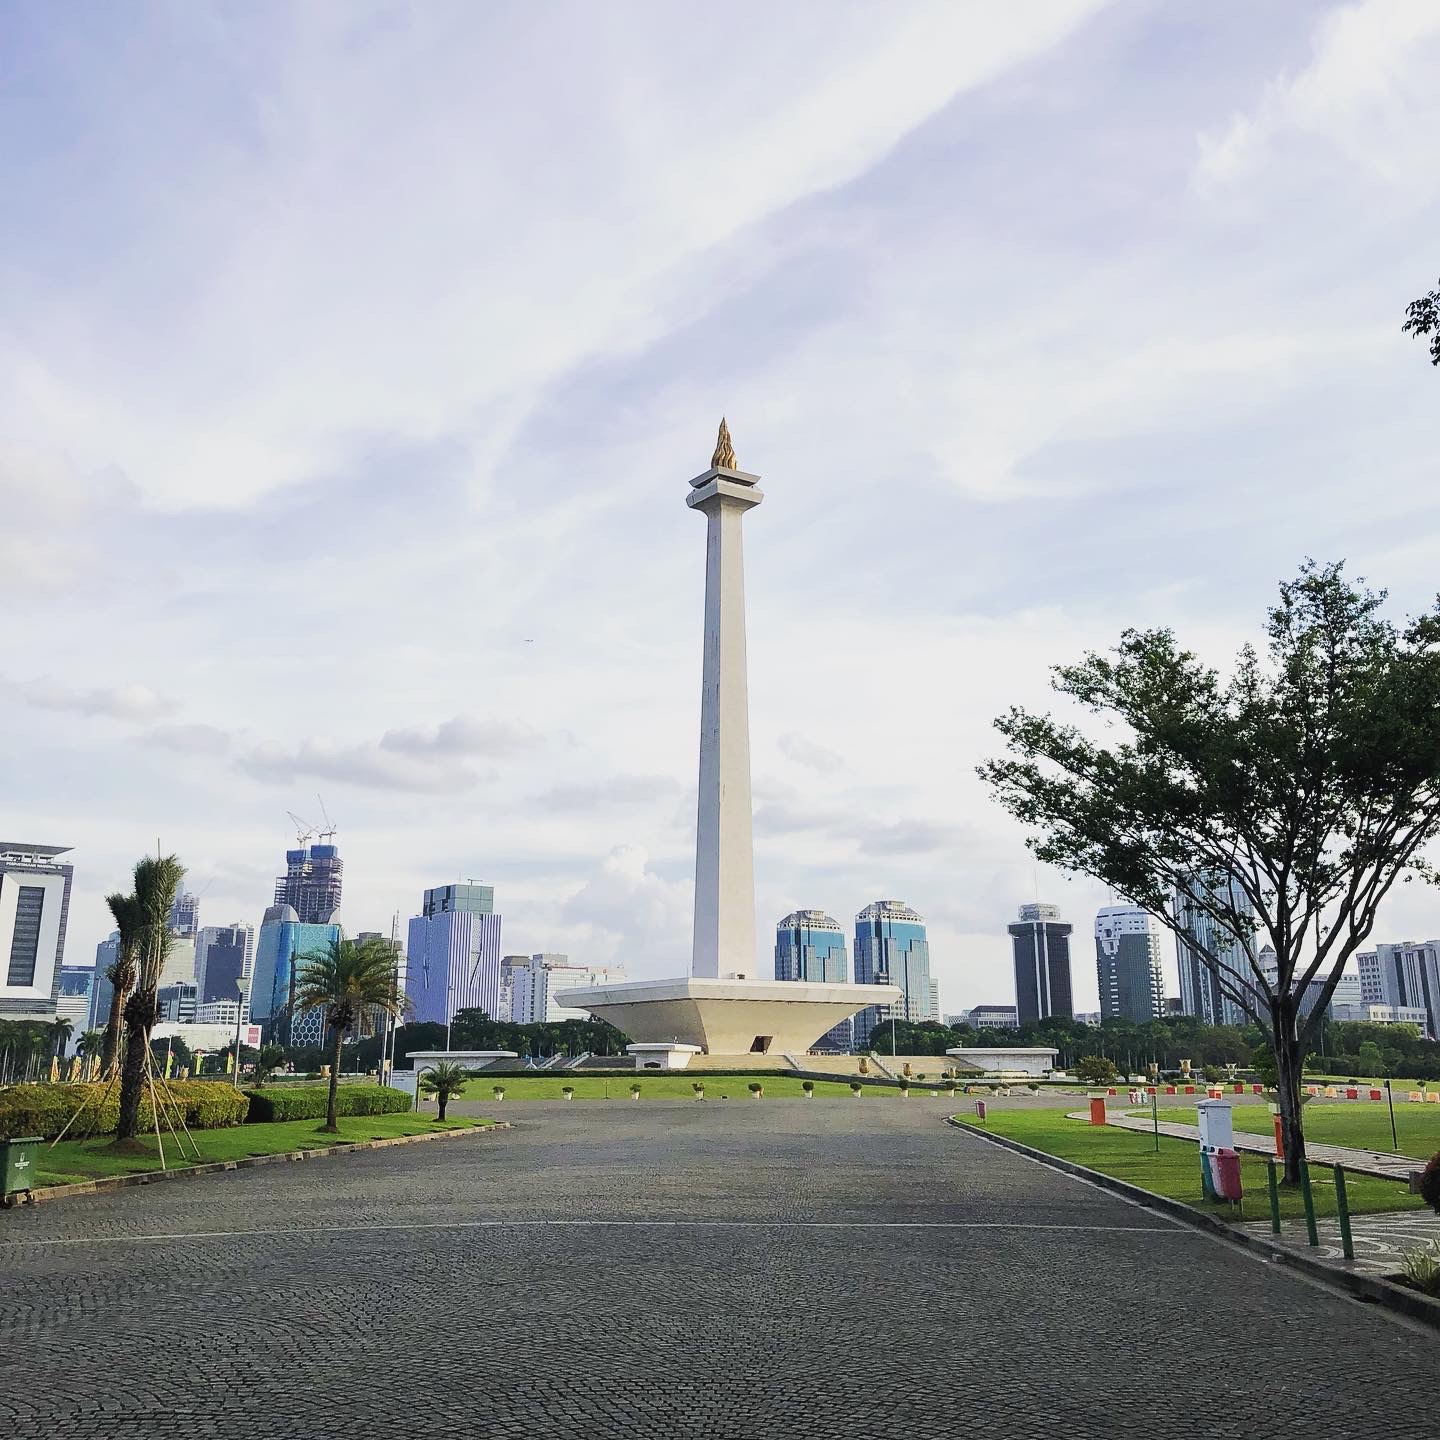 The Indonesian National Monument, by which I walk daily.